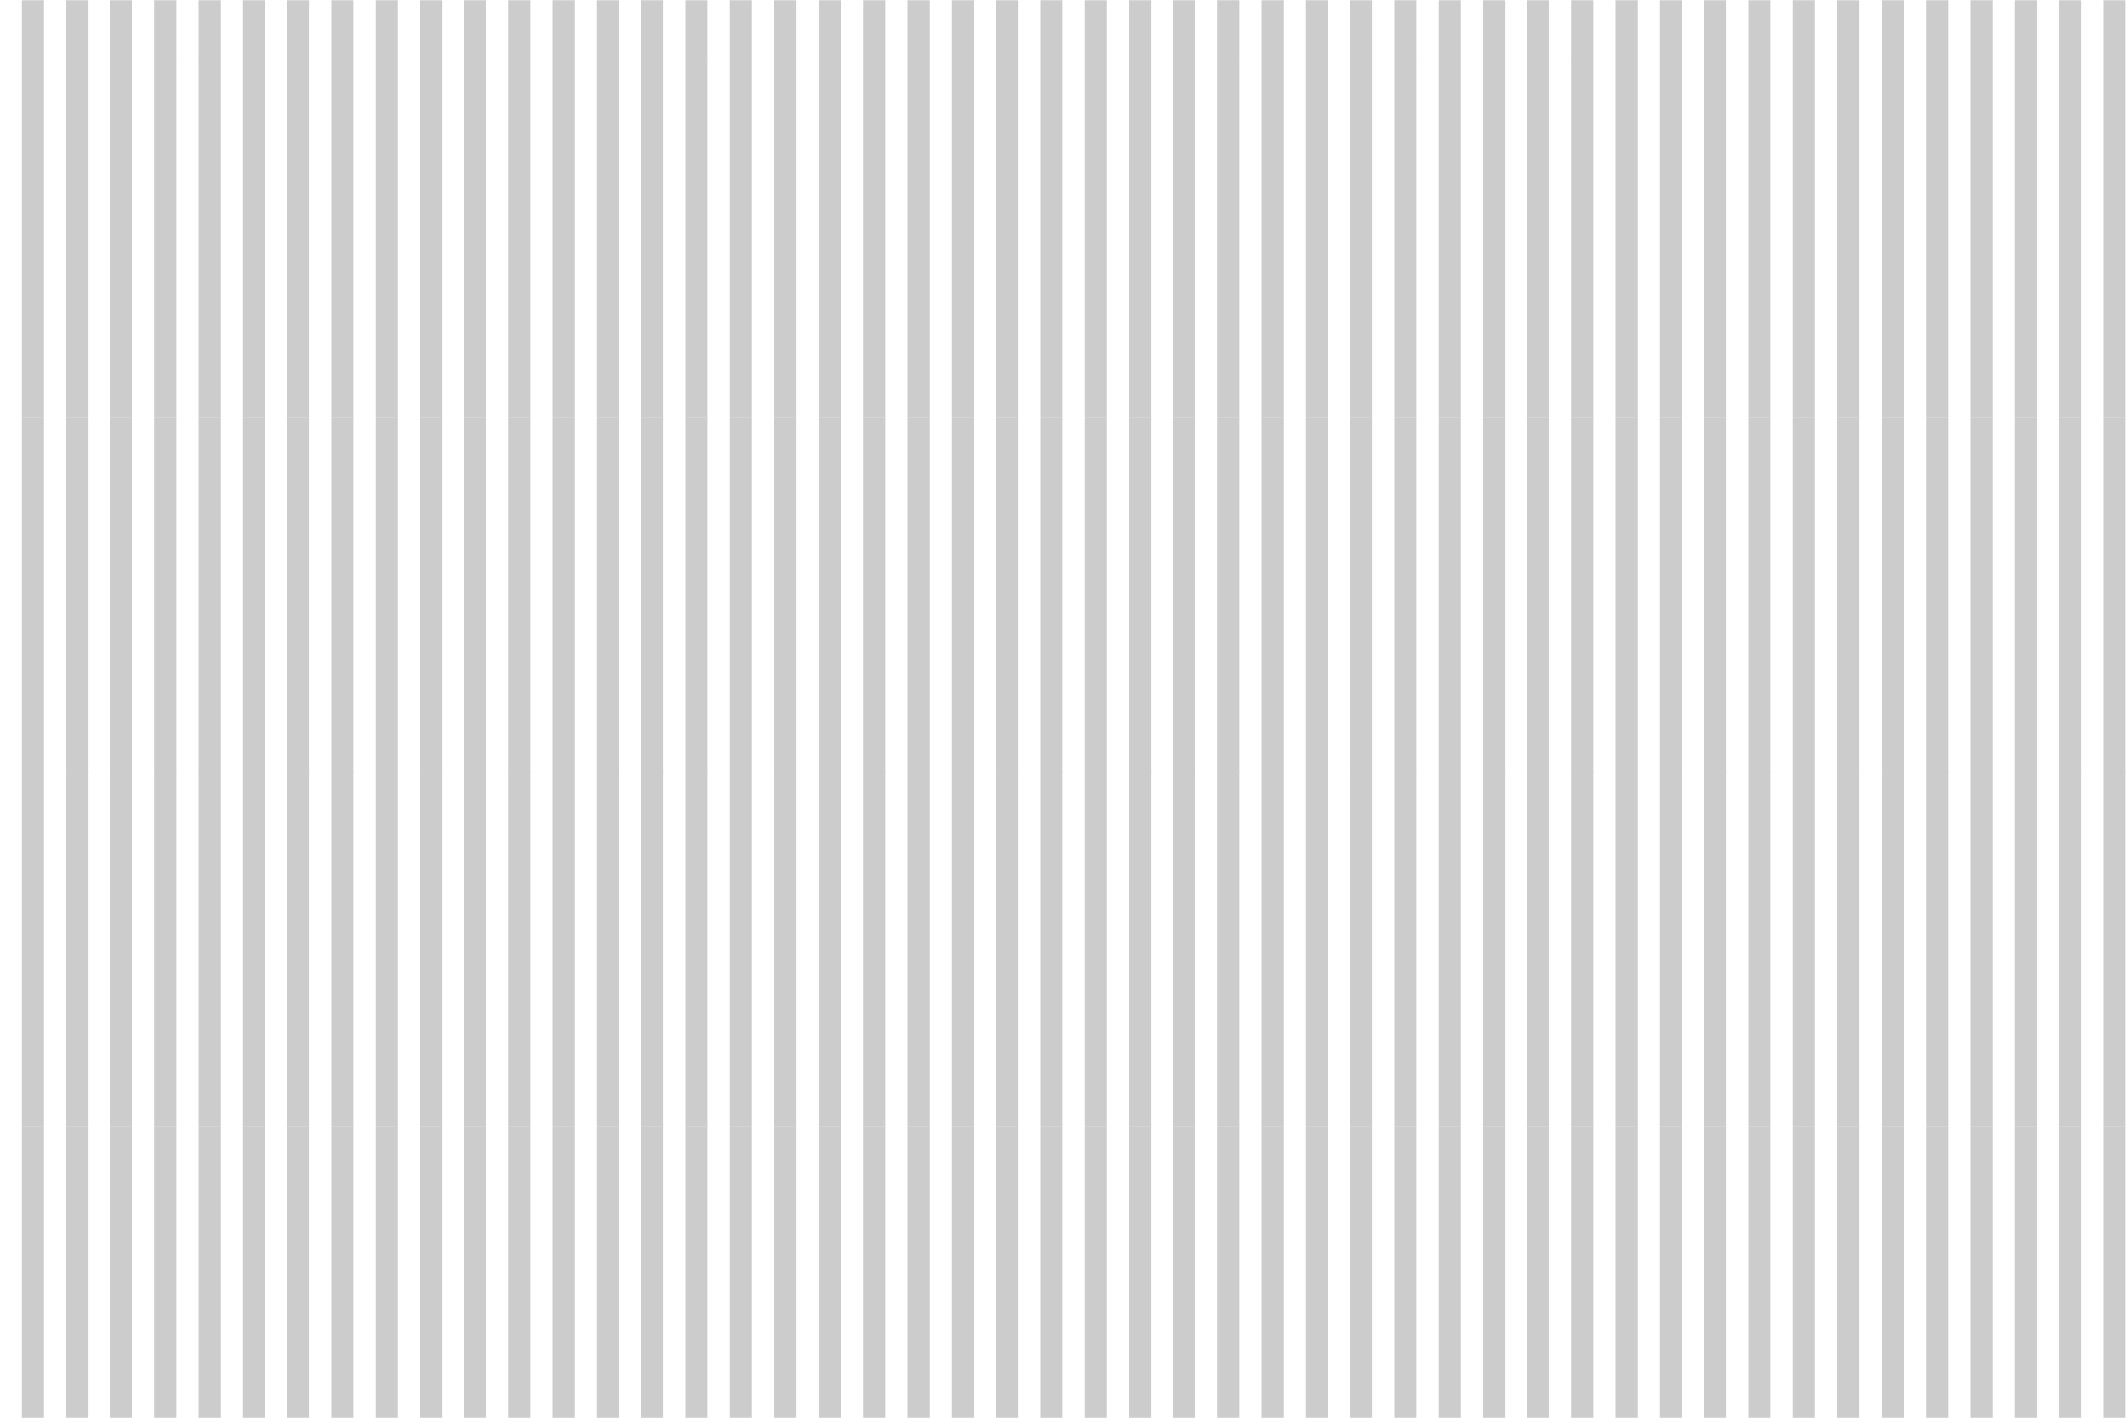 Thin grey lines in vertical.